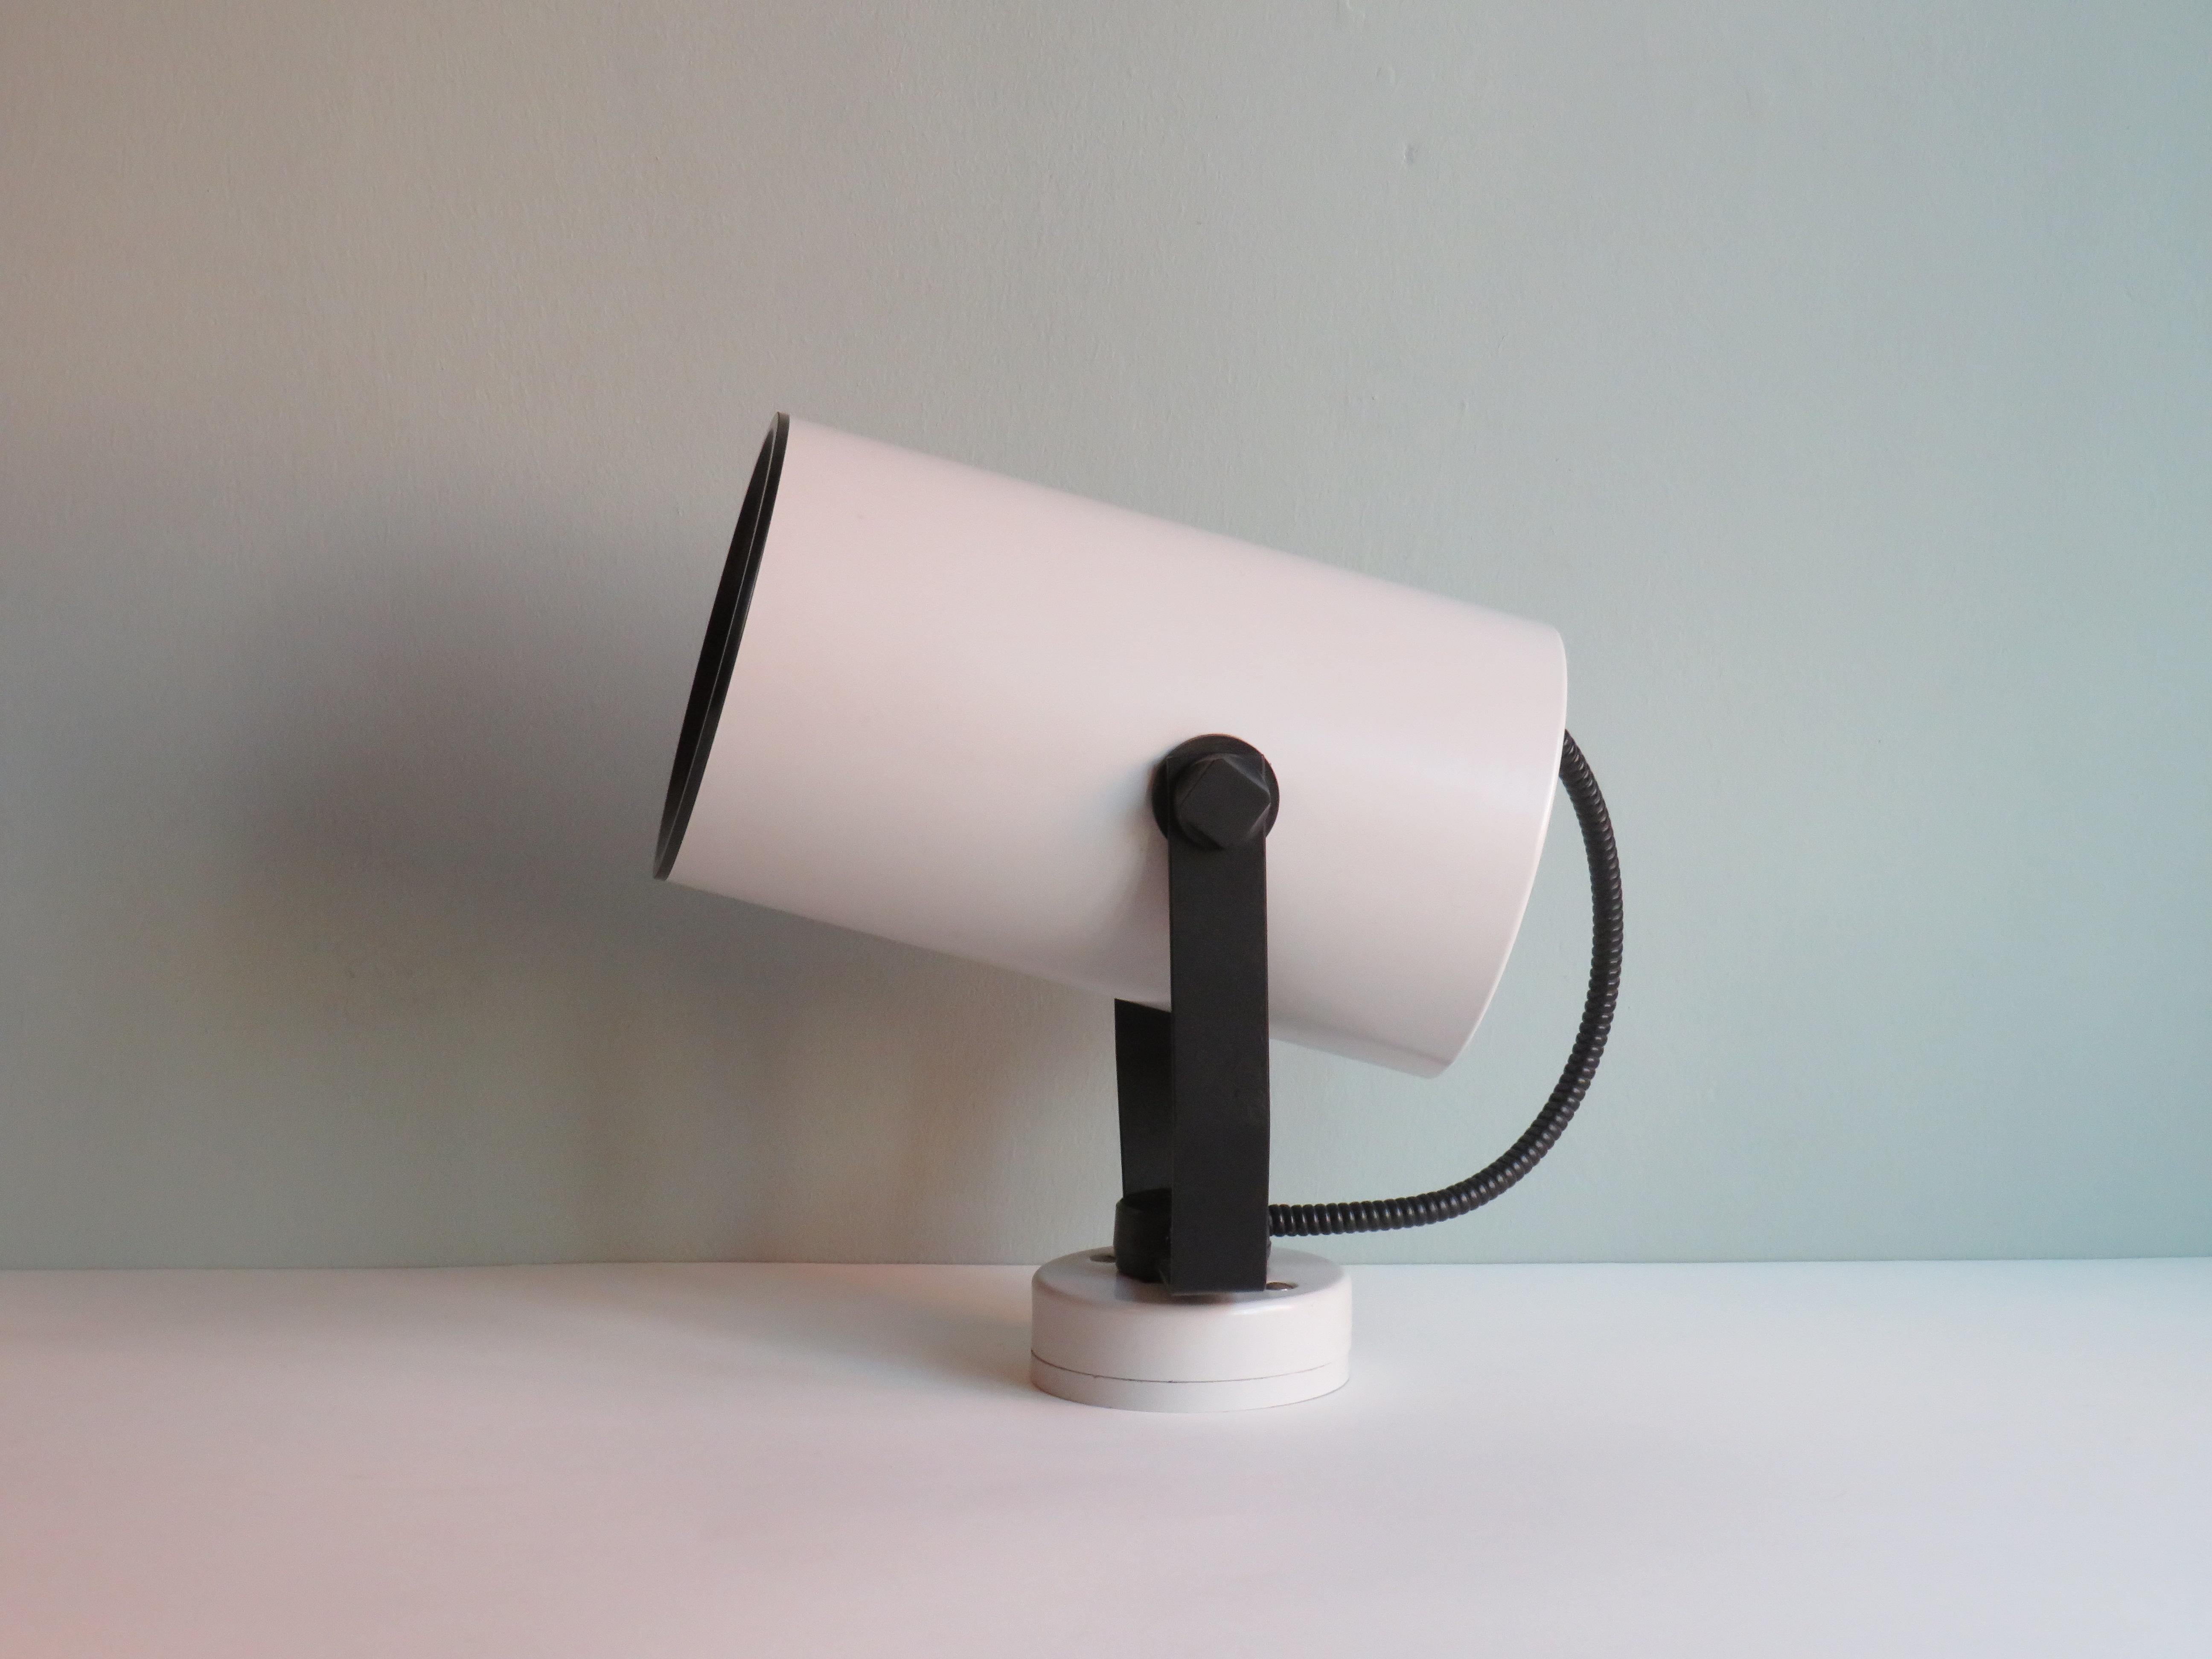 Large wall lamp, spot by Hoffmeister Germany 1970.
This light grey and black metal lamp can rotate on the wall mount and can also be oriented in different positions. It has a E 27 fitting and is in good condition.
Dimensions: total height 36